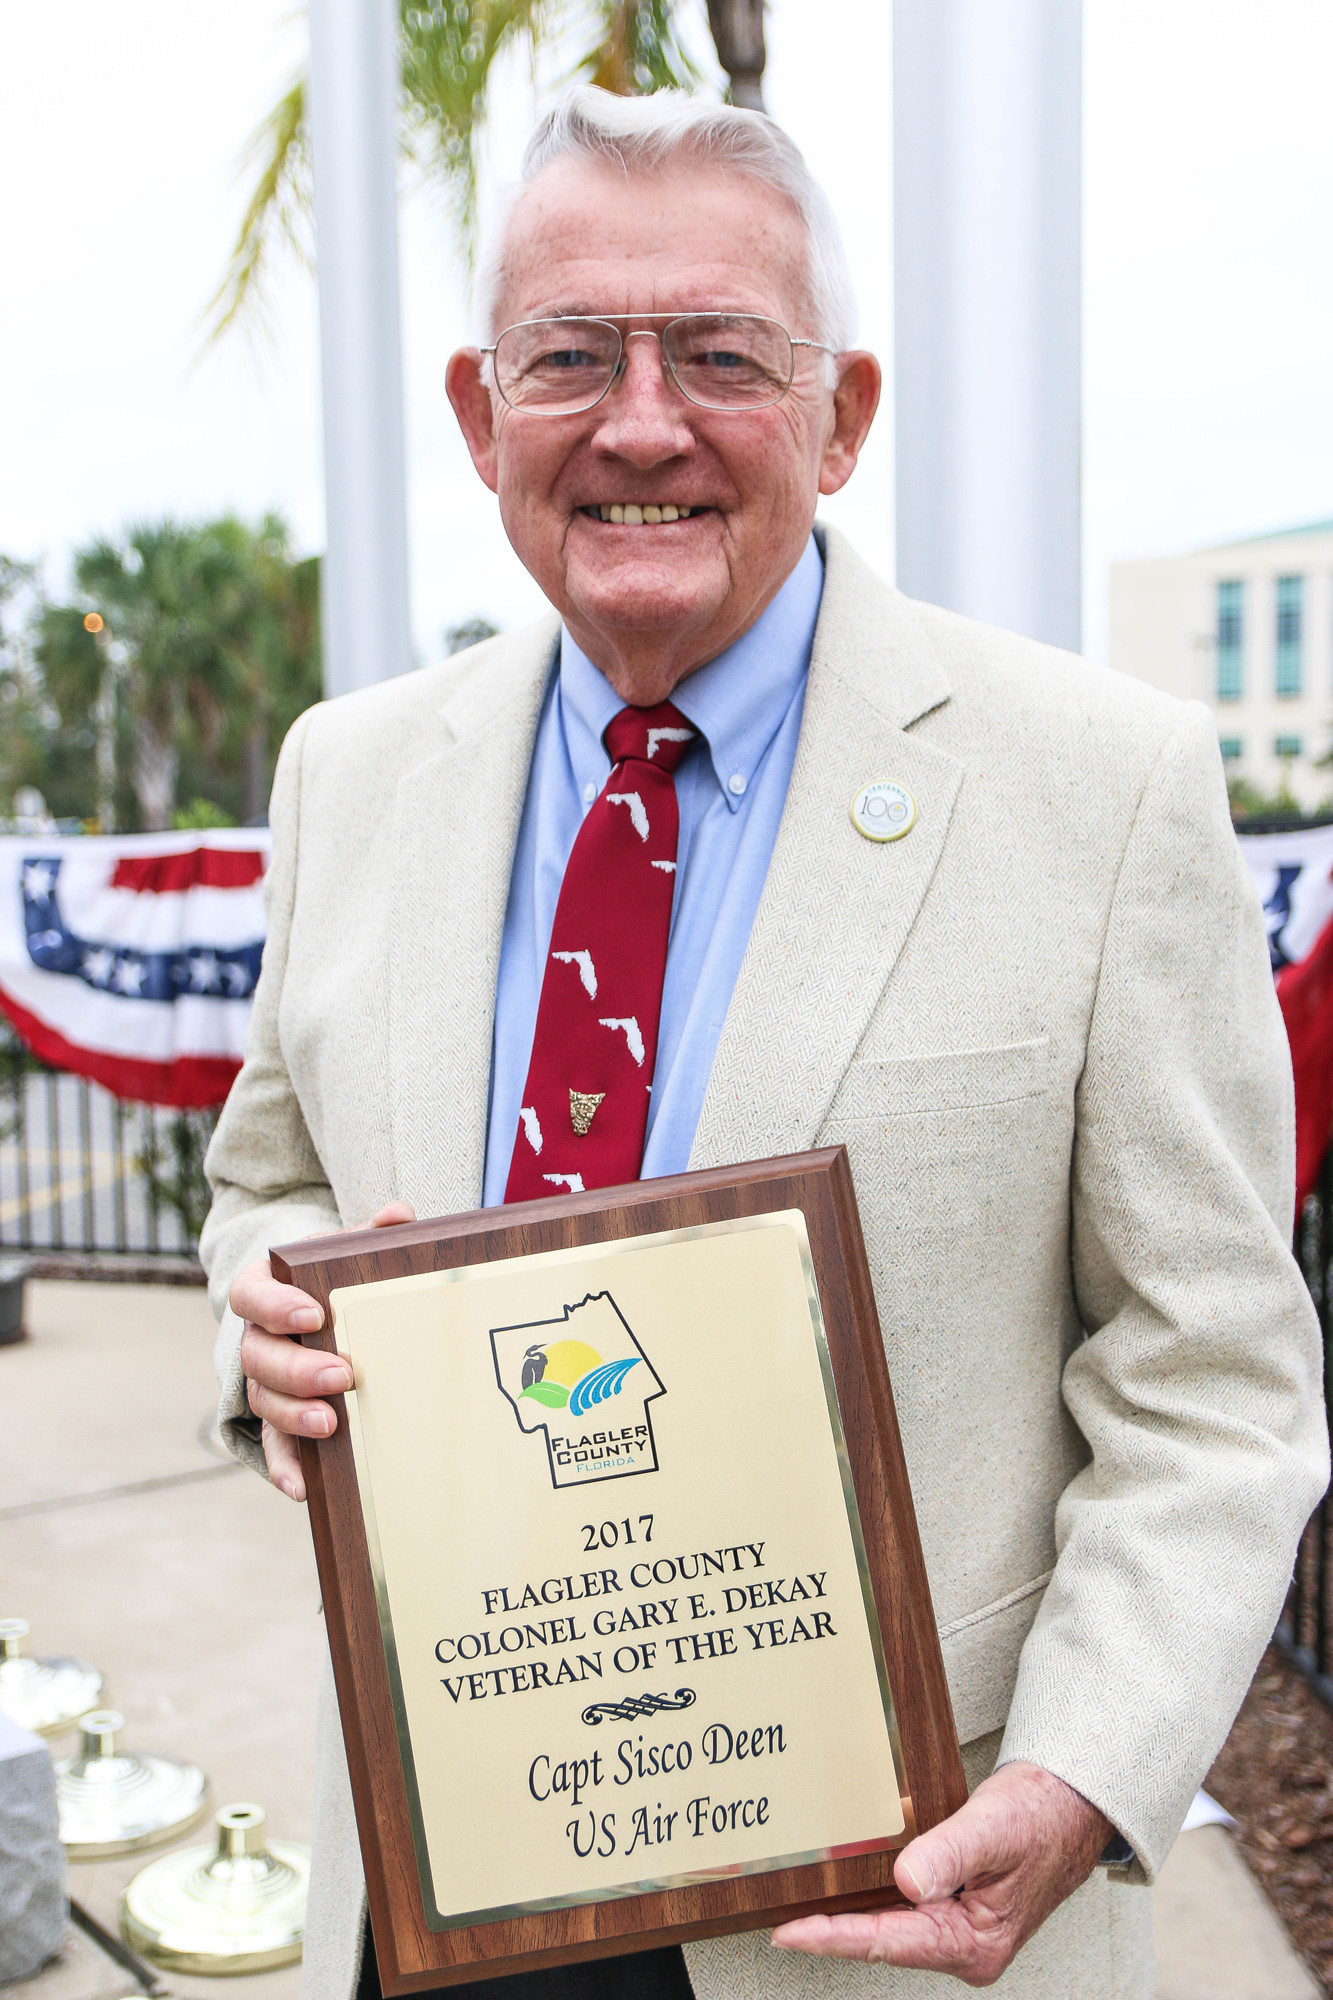 “This is indeed an honor,” Sisco Deen said after being awarded the 2017 Flagler County Colonel Gary E. DeKay Veteran of the Year award.